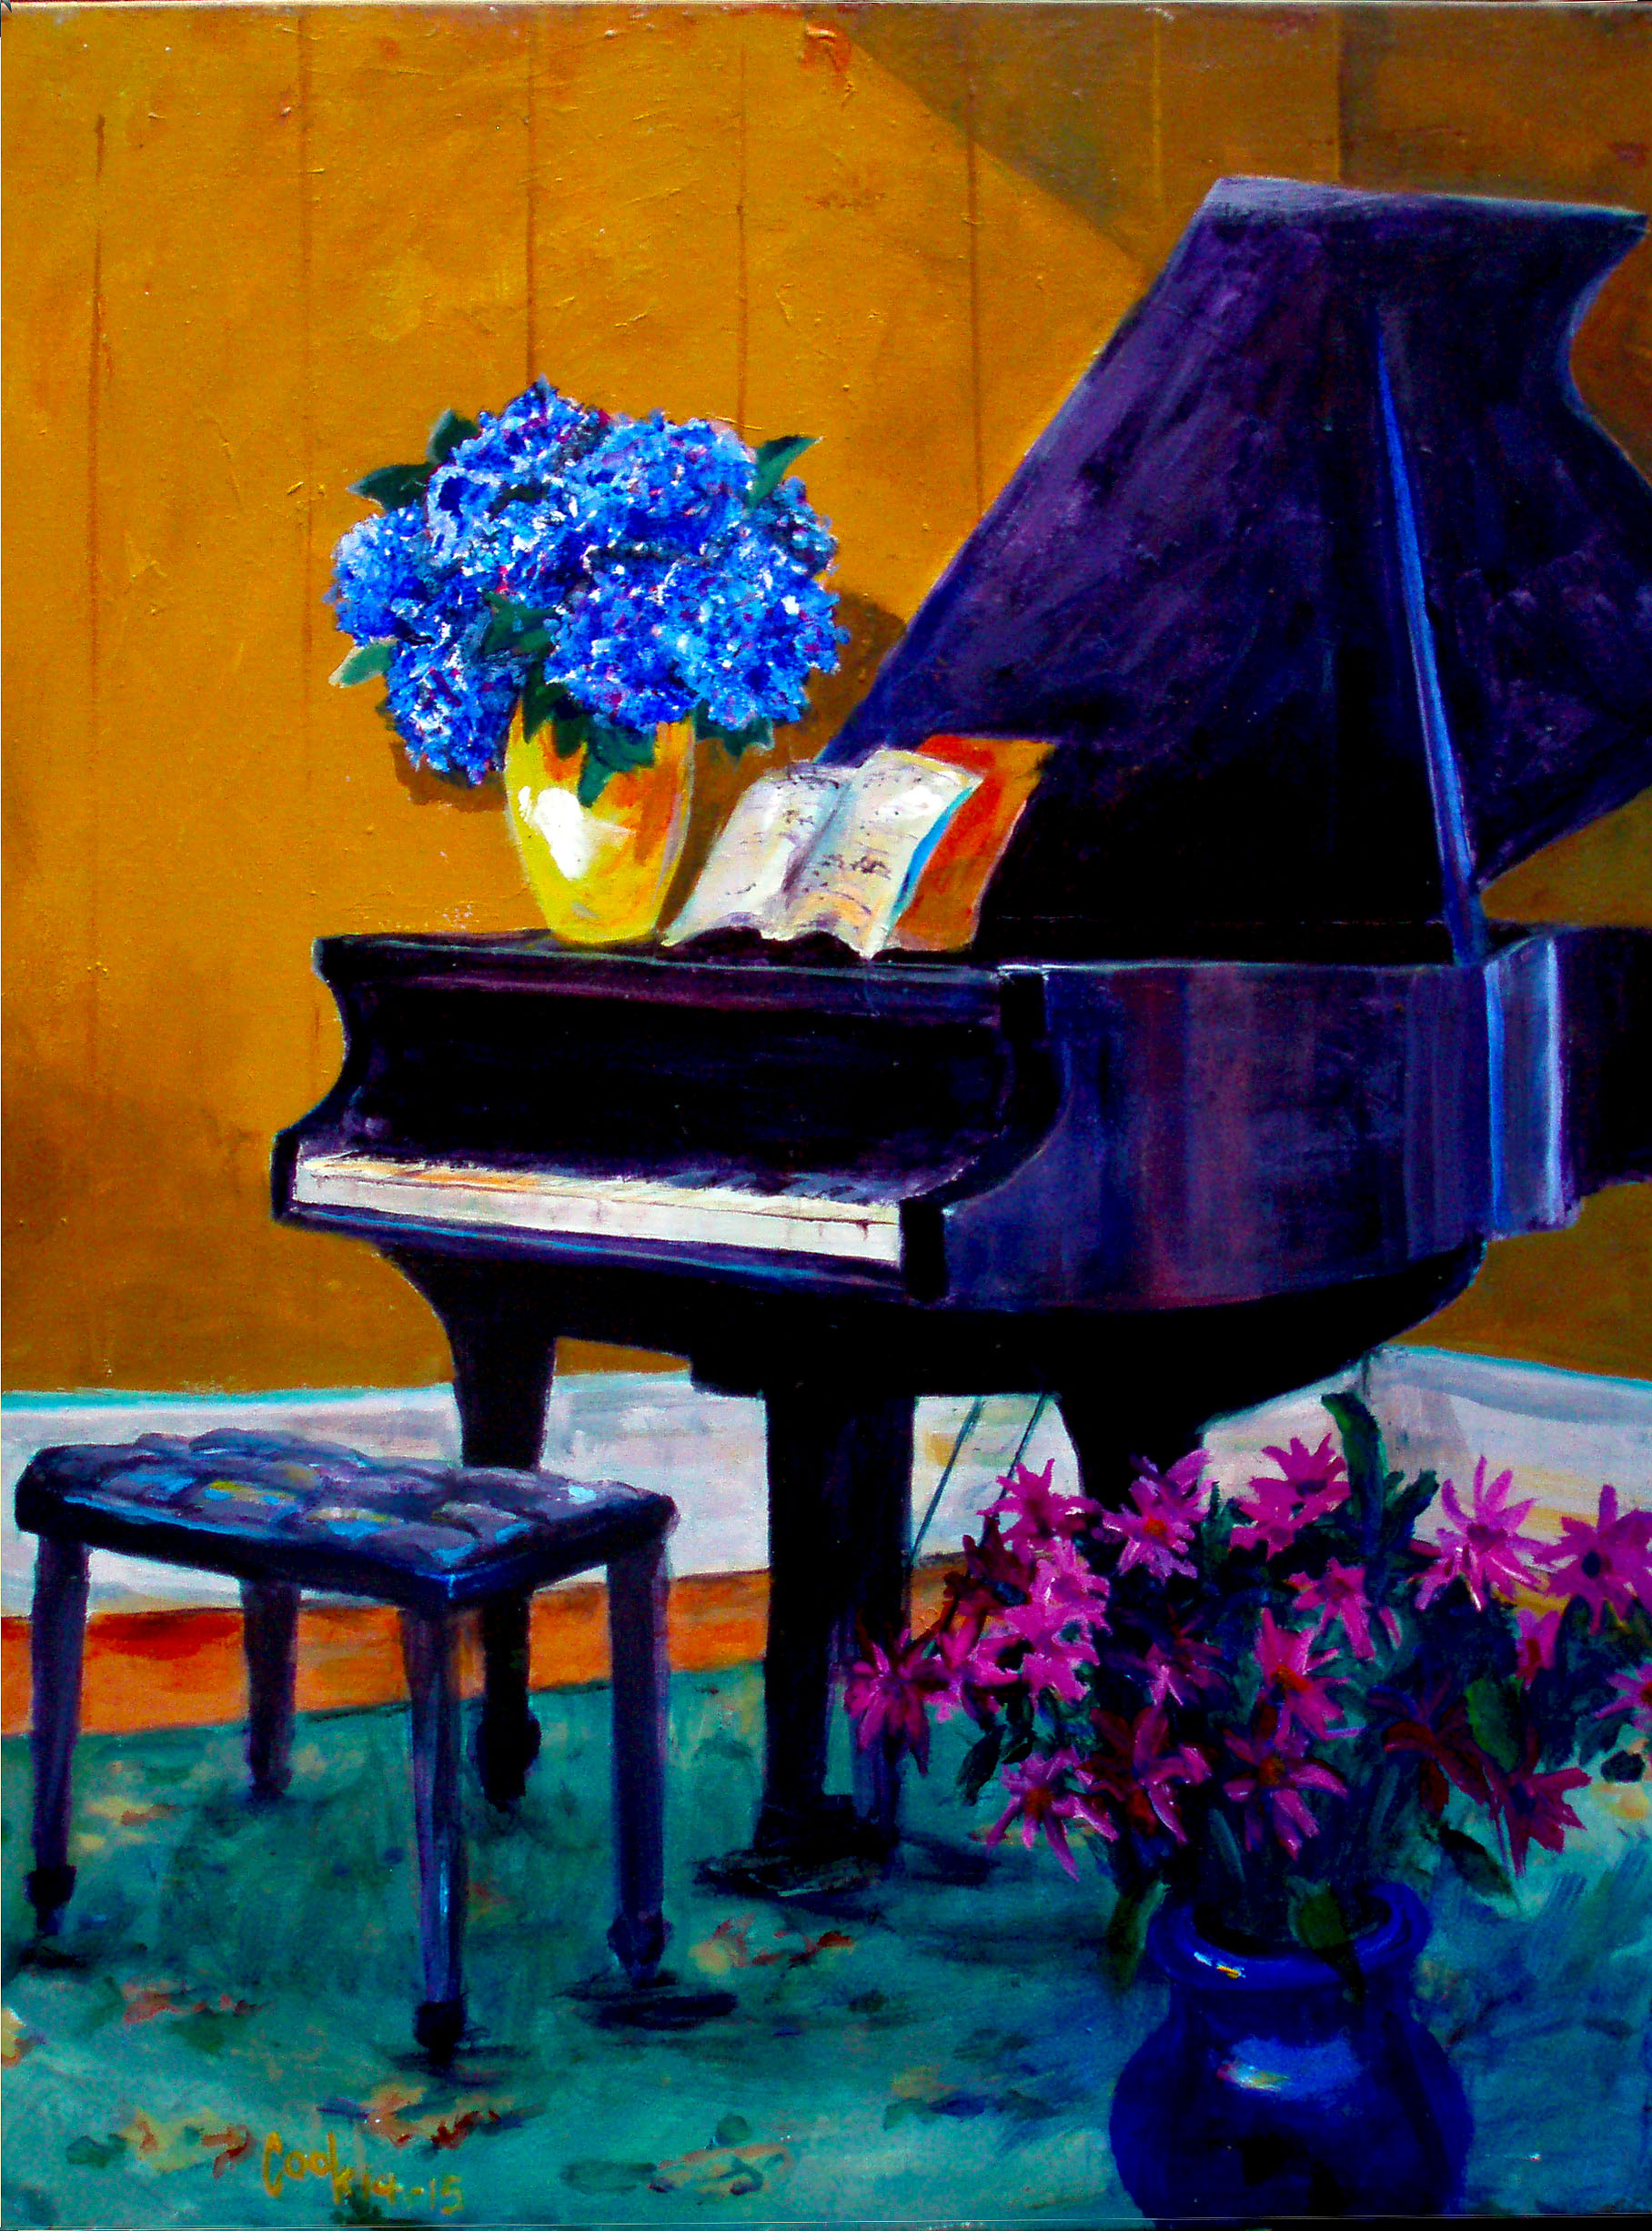 PIANO WITH FLOWERS, $1,500.